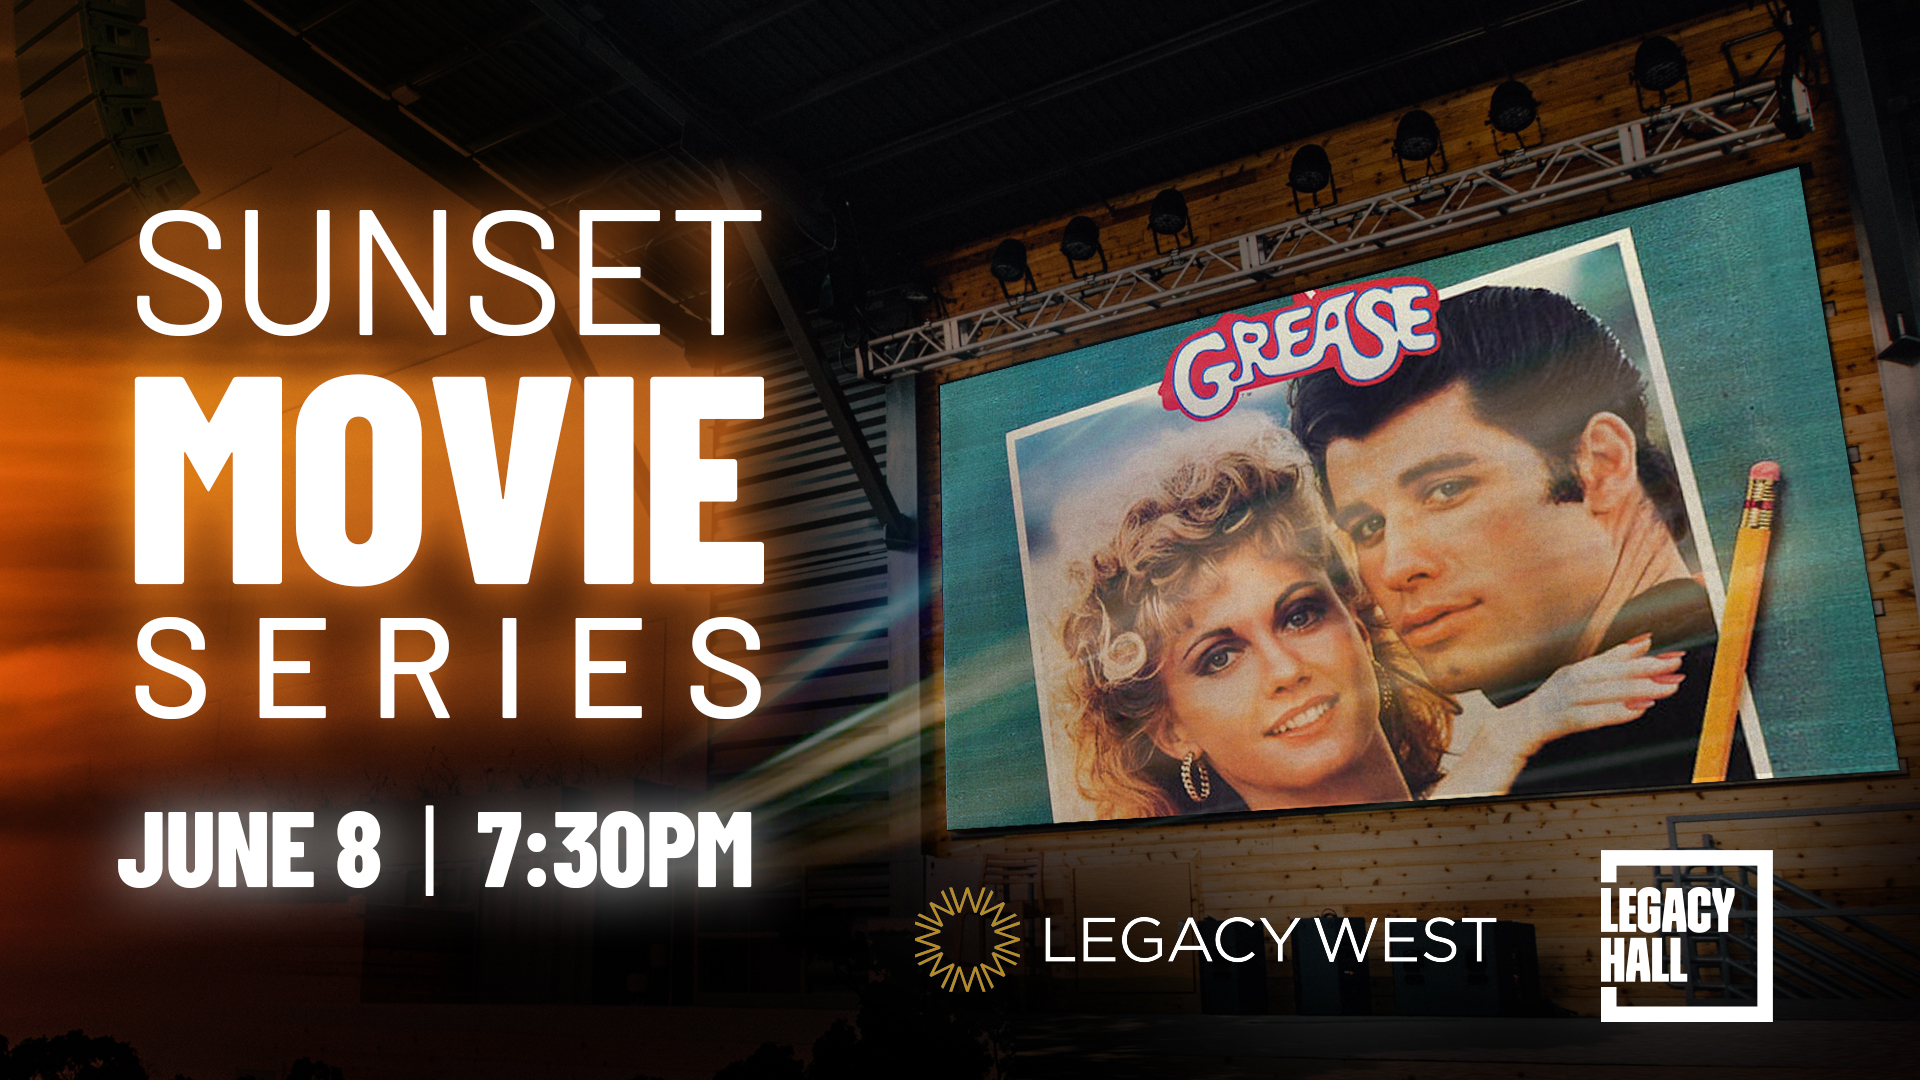 Sunset Movie Series - Grease